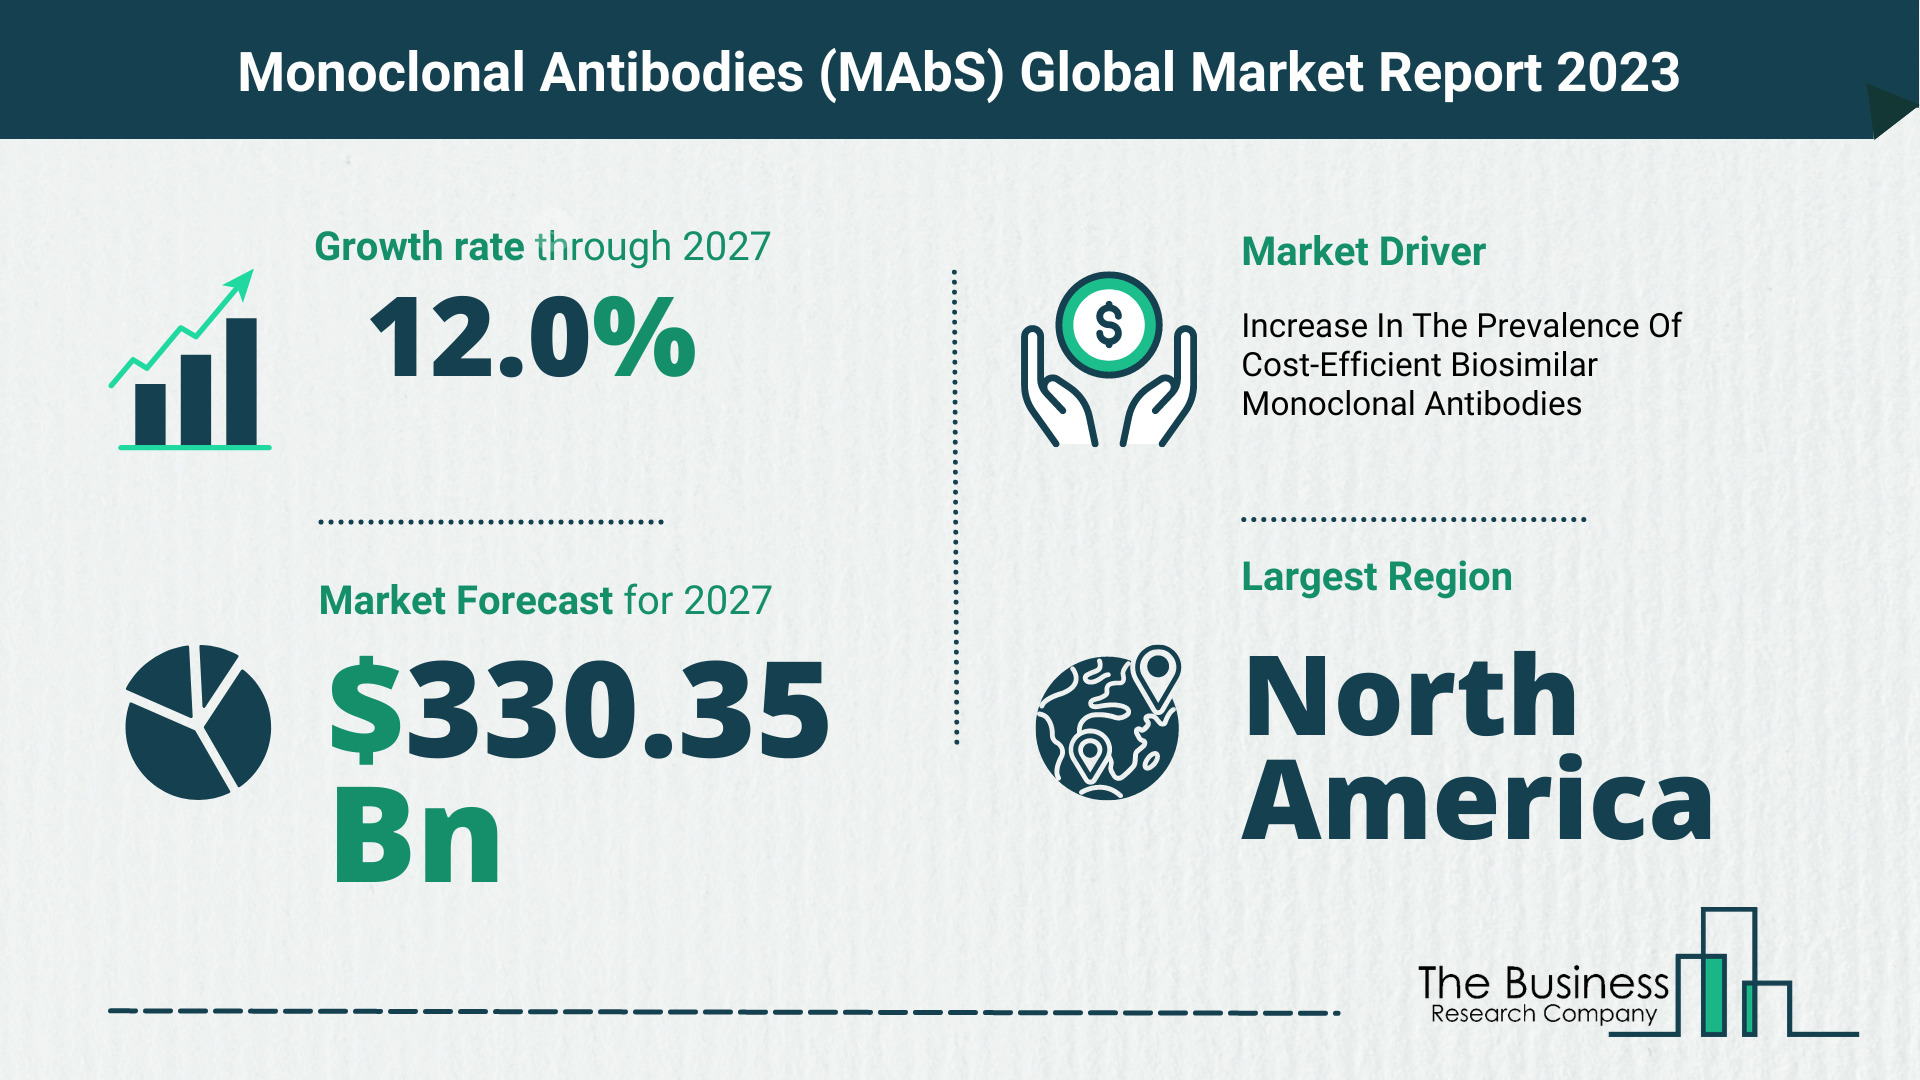 Monoclonal Antibodies (MAbS) Market Forecast 2023-2027 By The Business Research Company